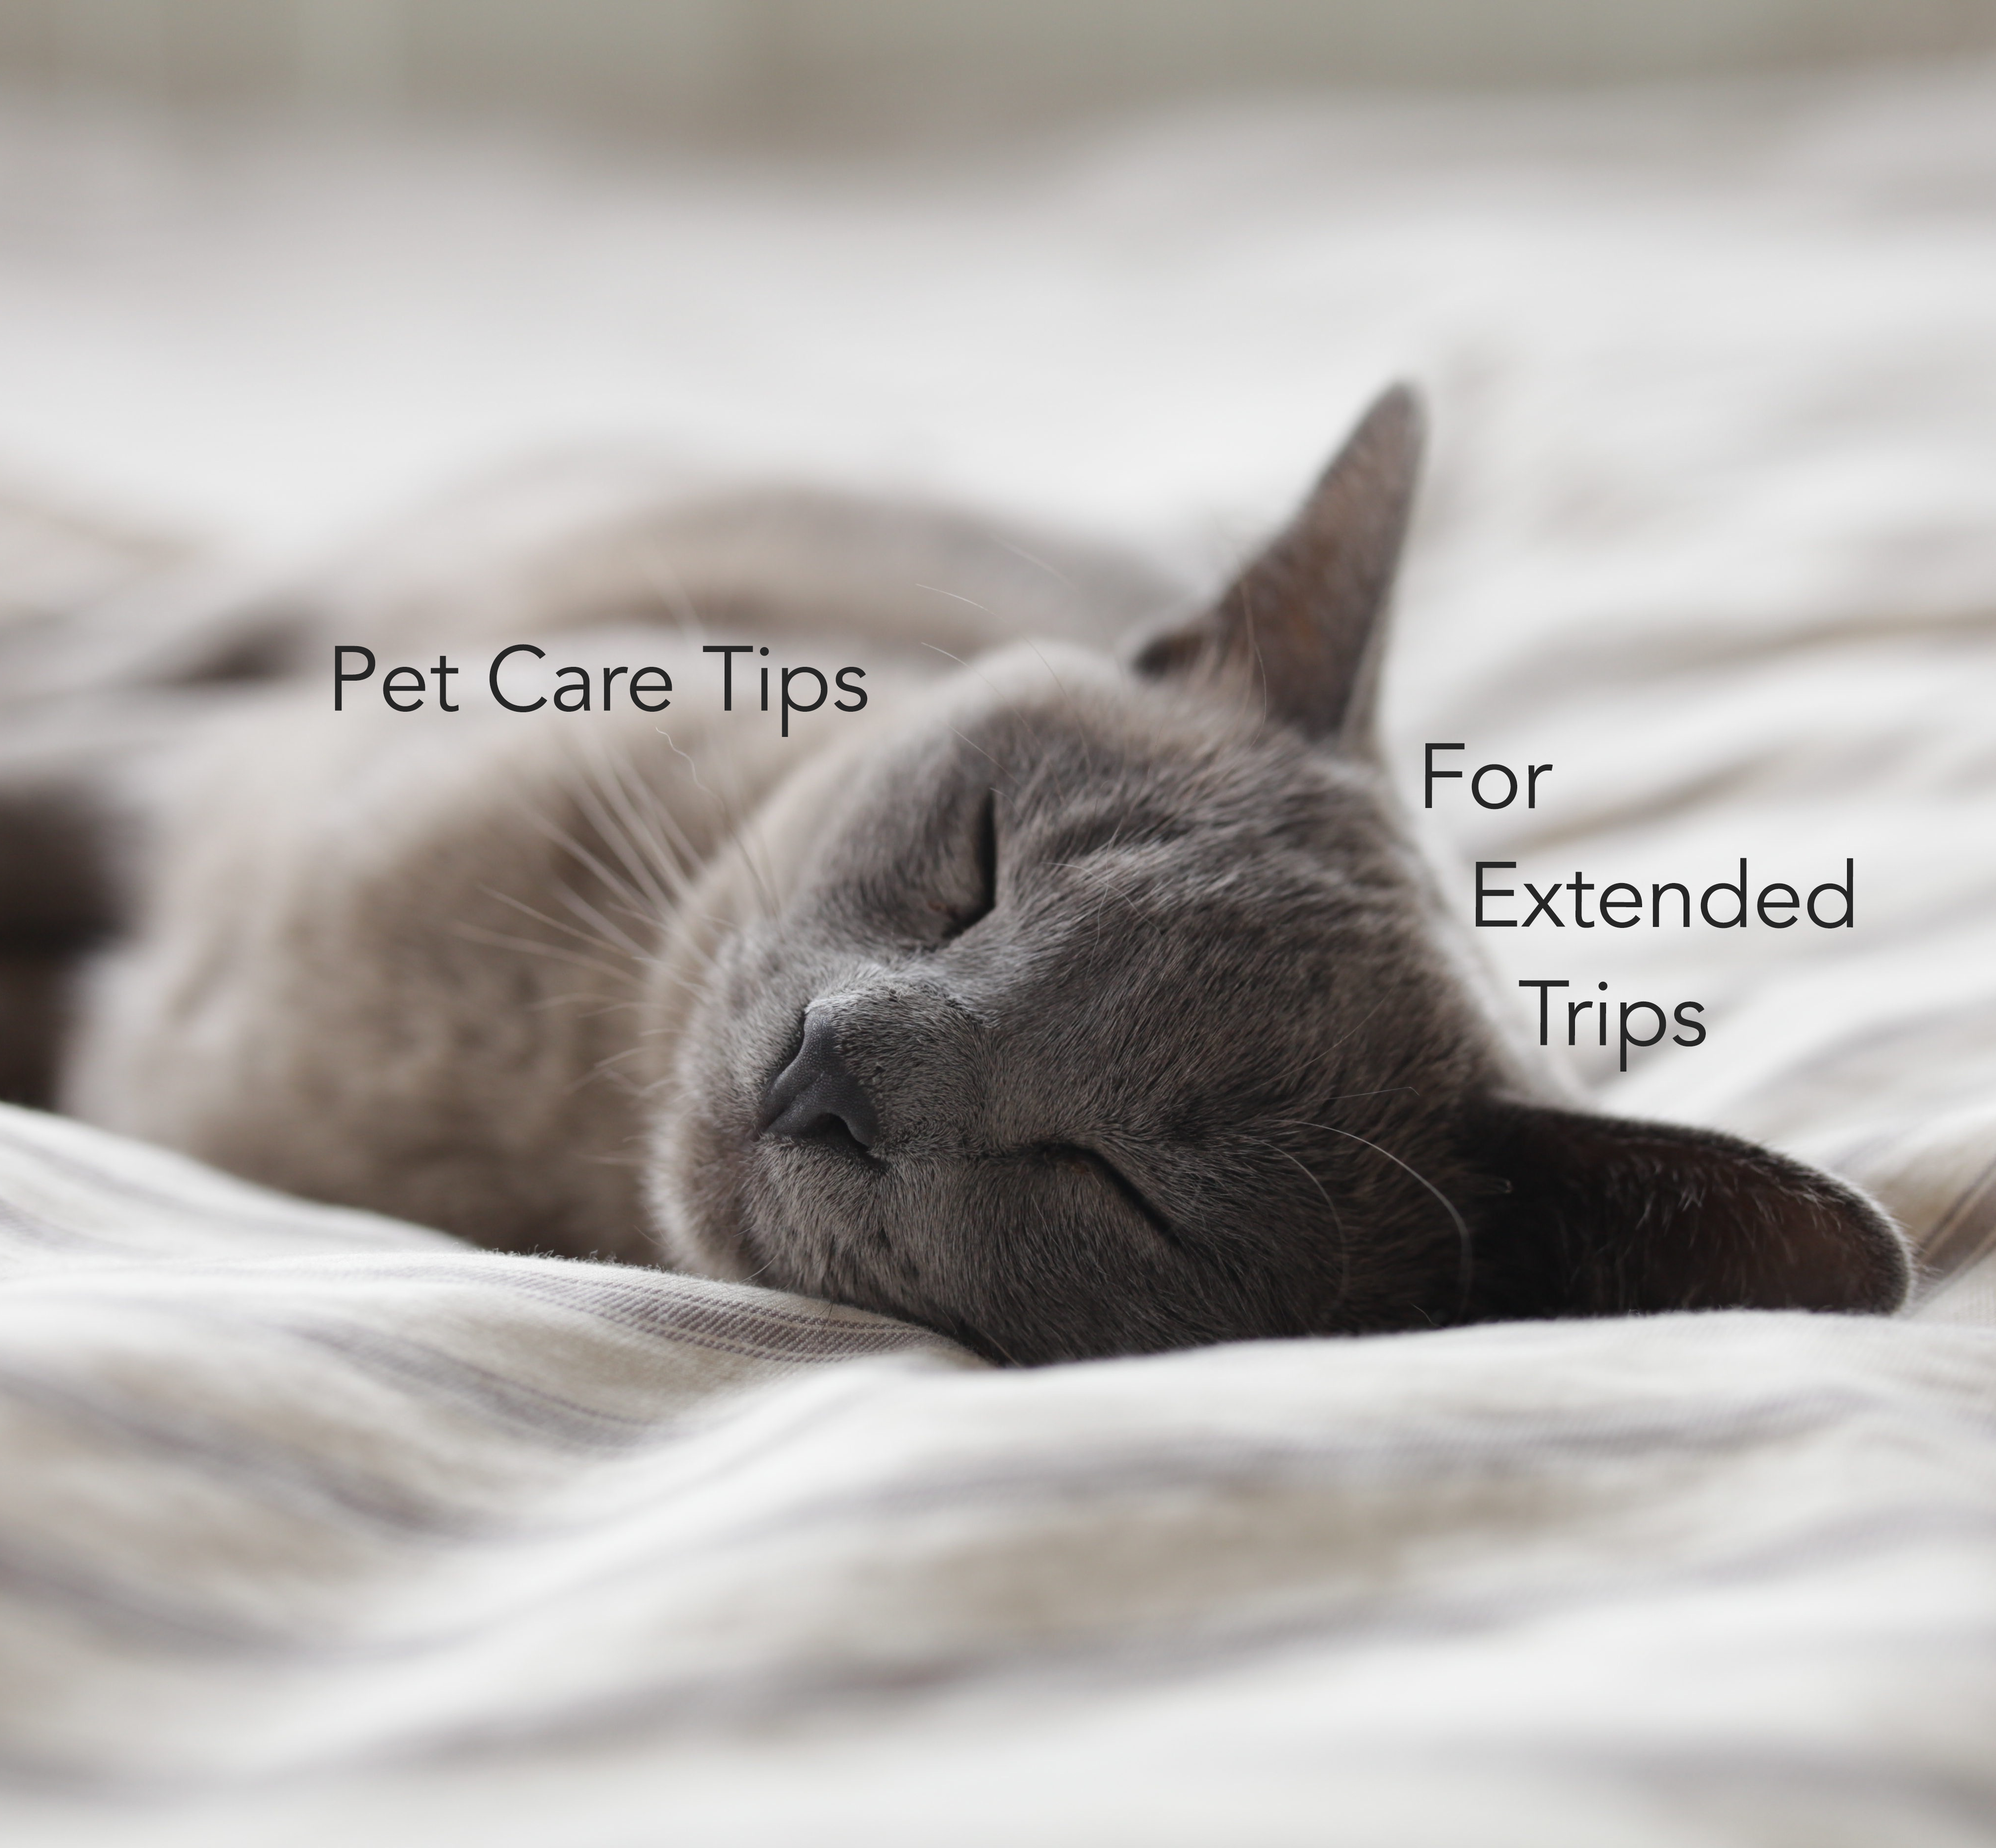 Pet Care Tips for Extended Trips